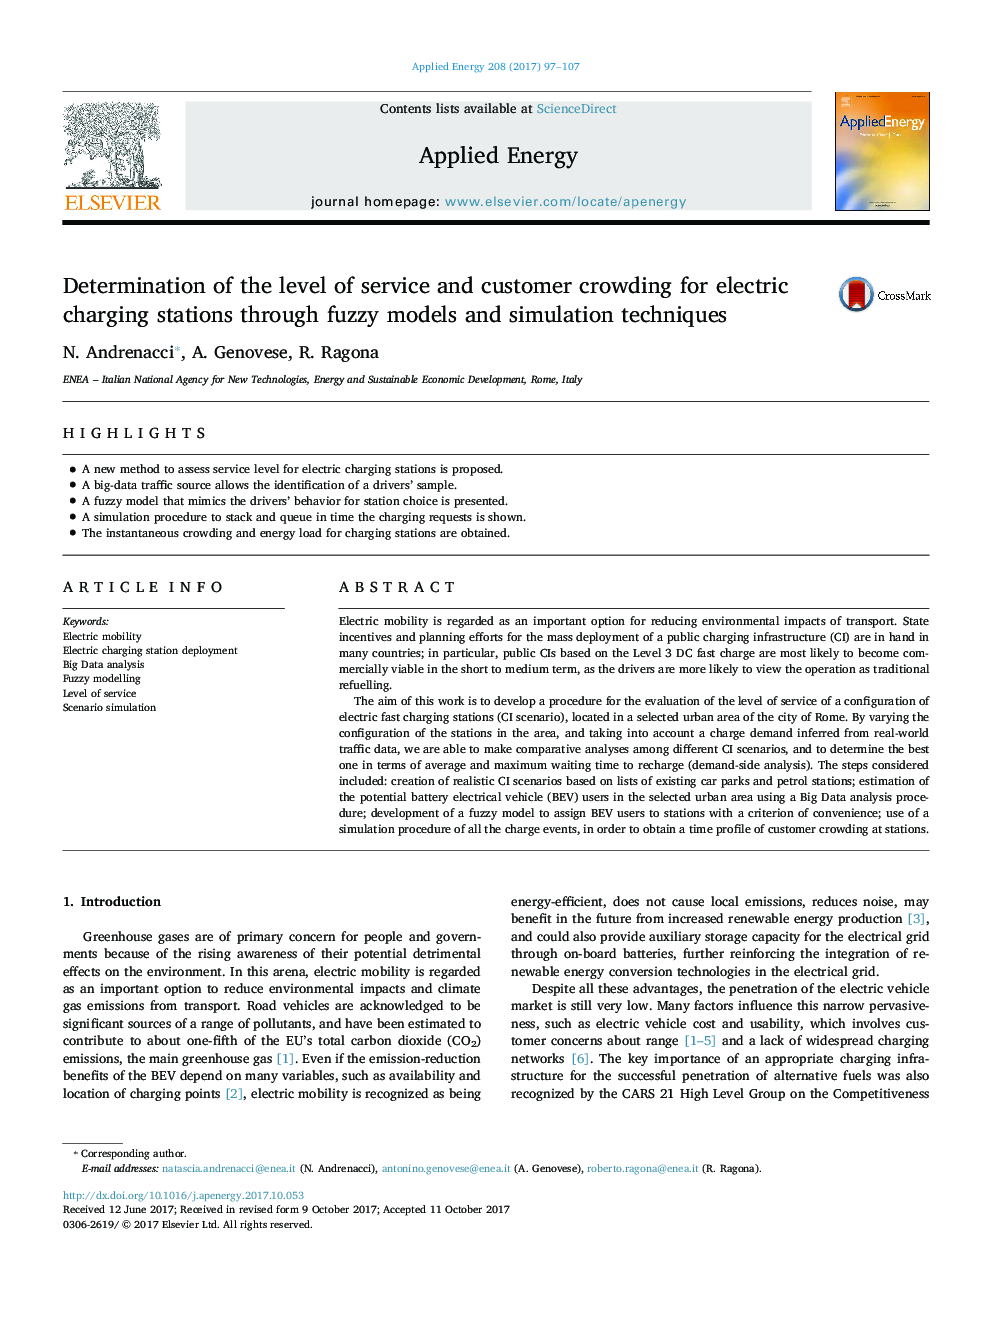 Determination of the level of service and customer crowding for electric charging stations through fuzzy models and simulation techniques